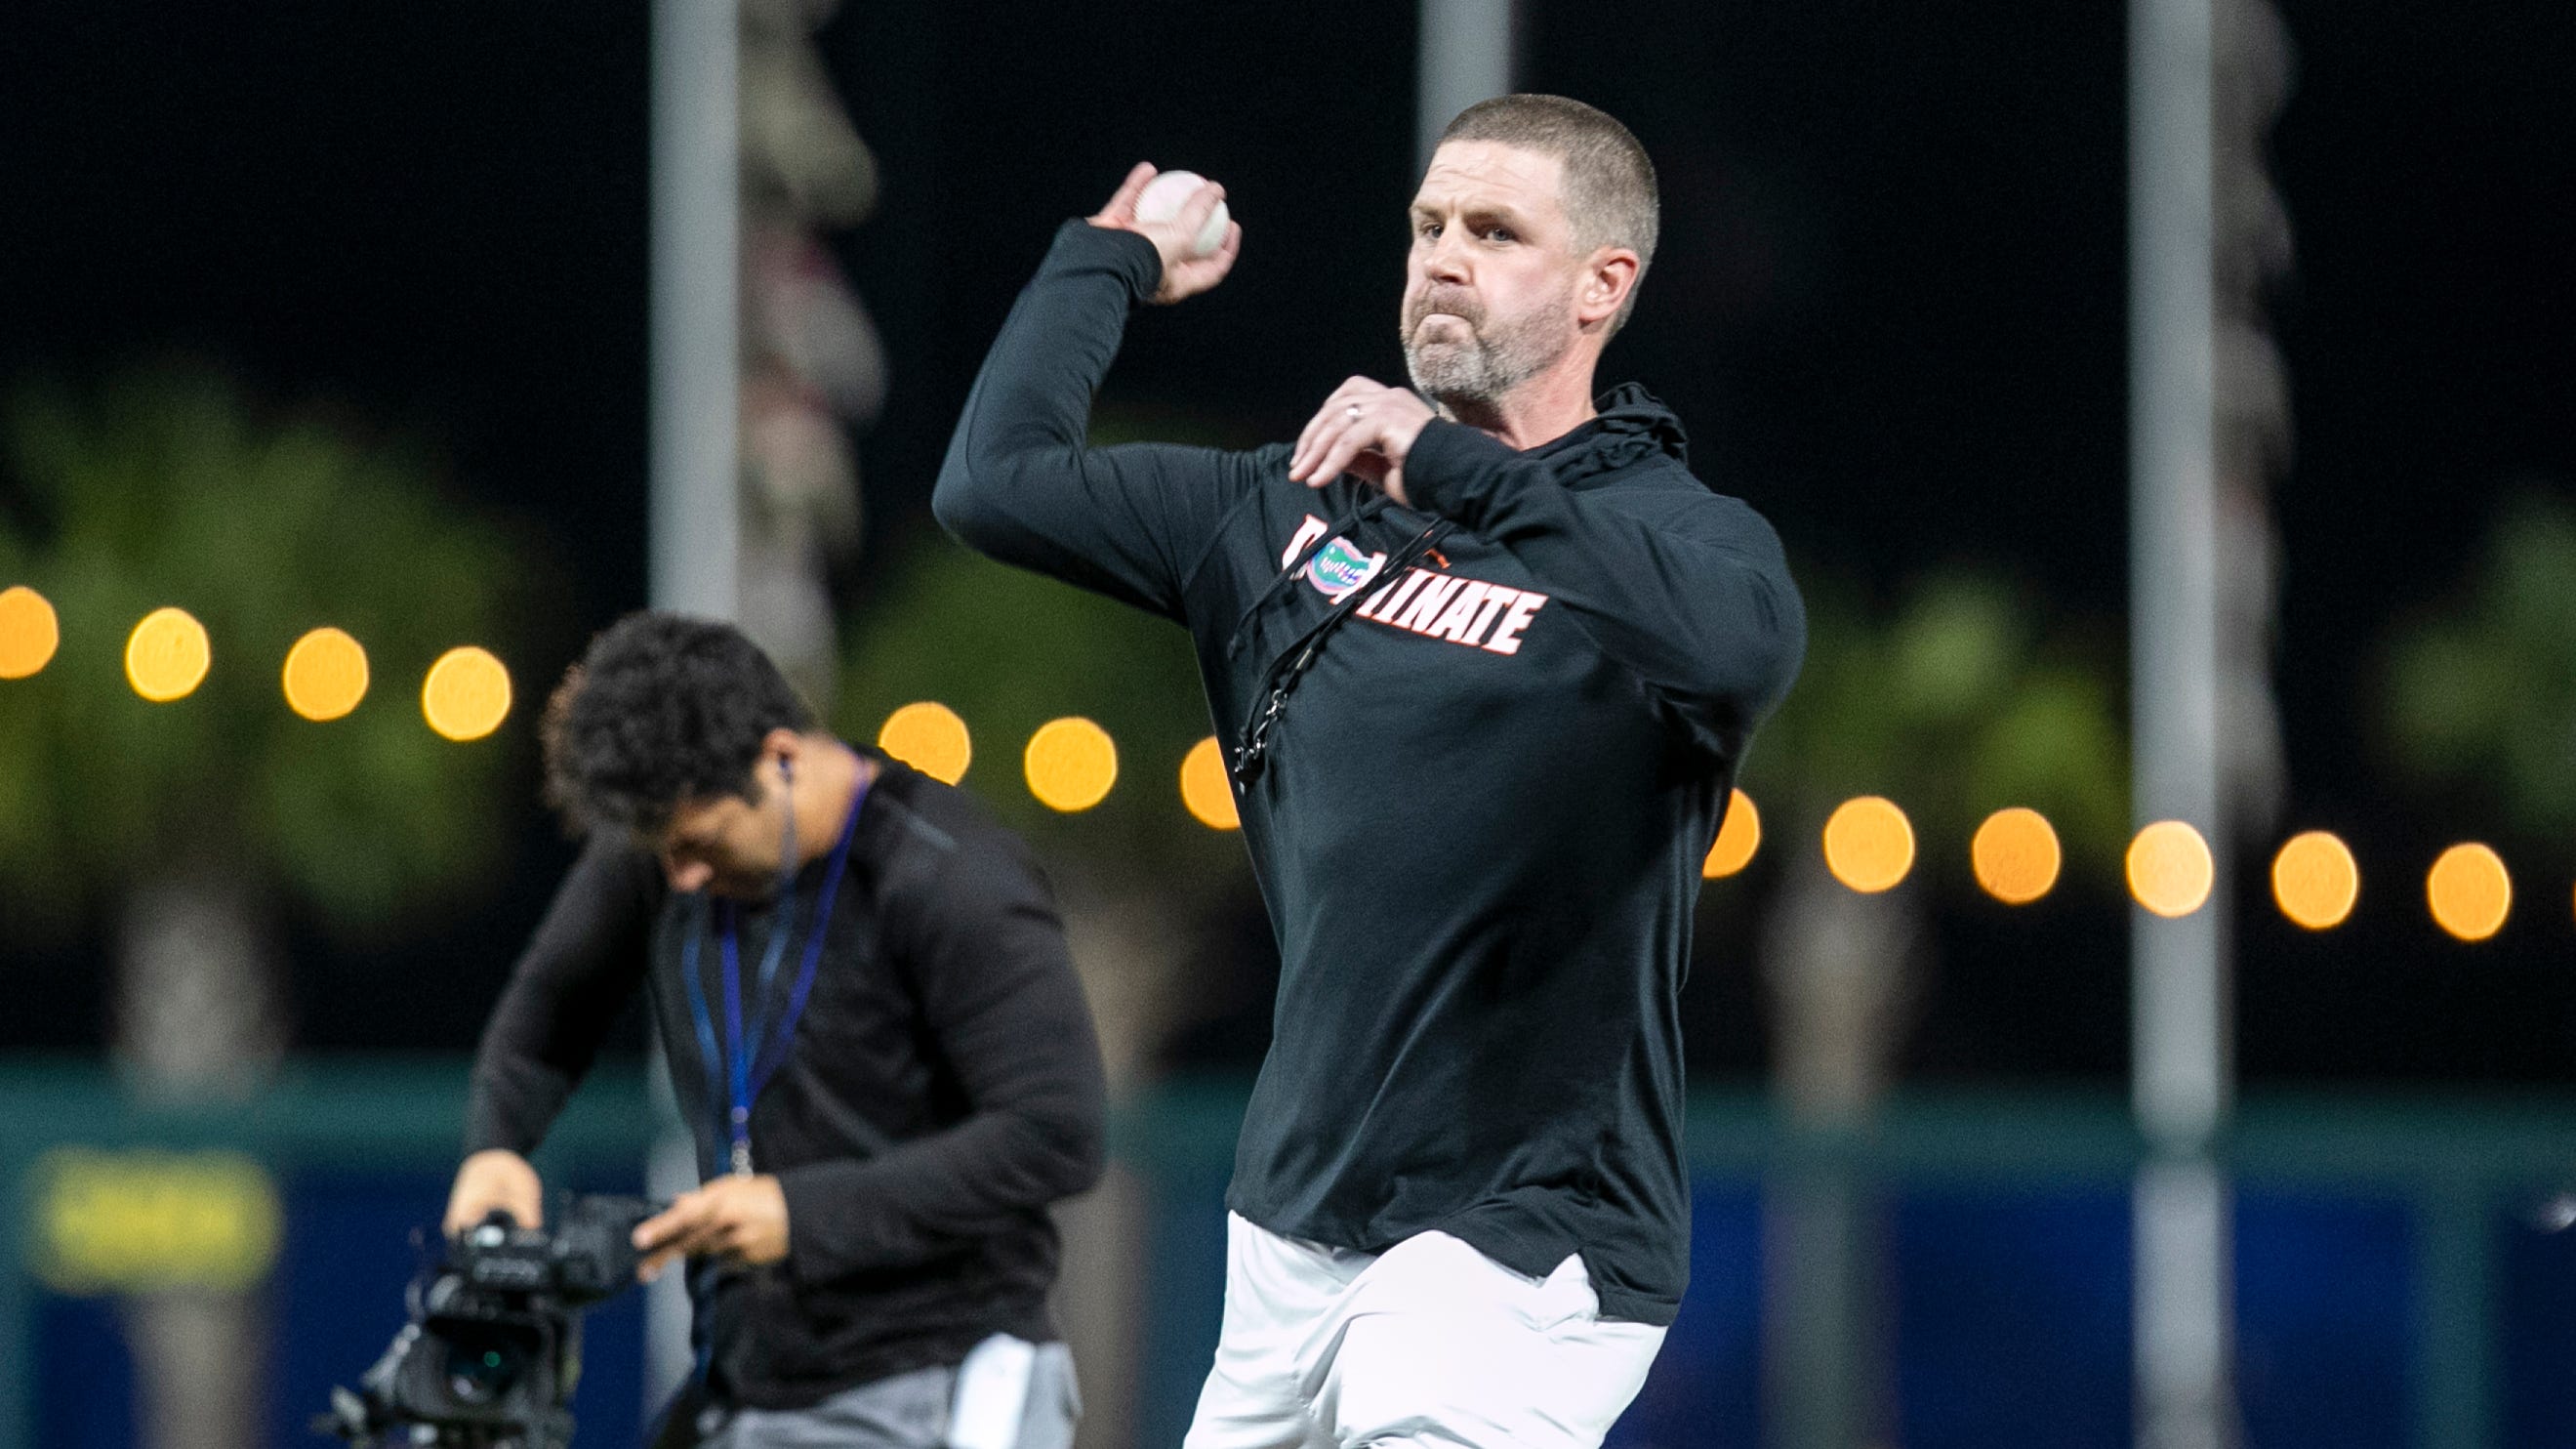 Florida football coach Billy Napier throws out first pitch at UF baseball  game.